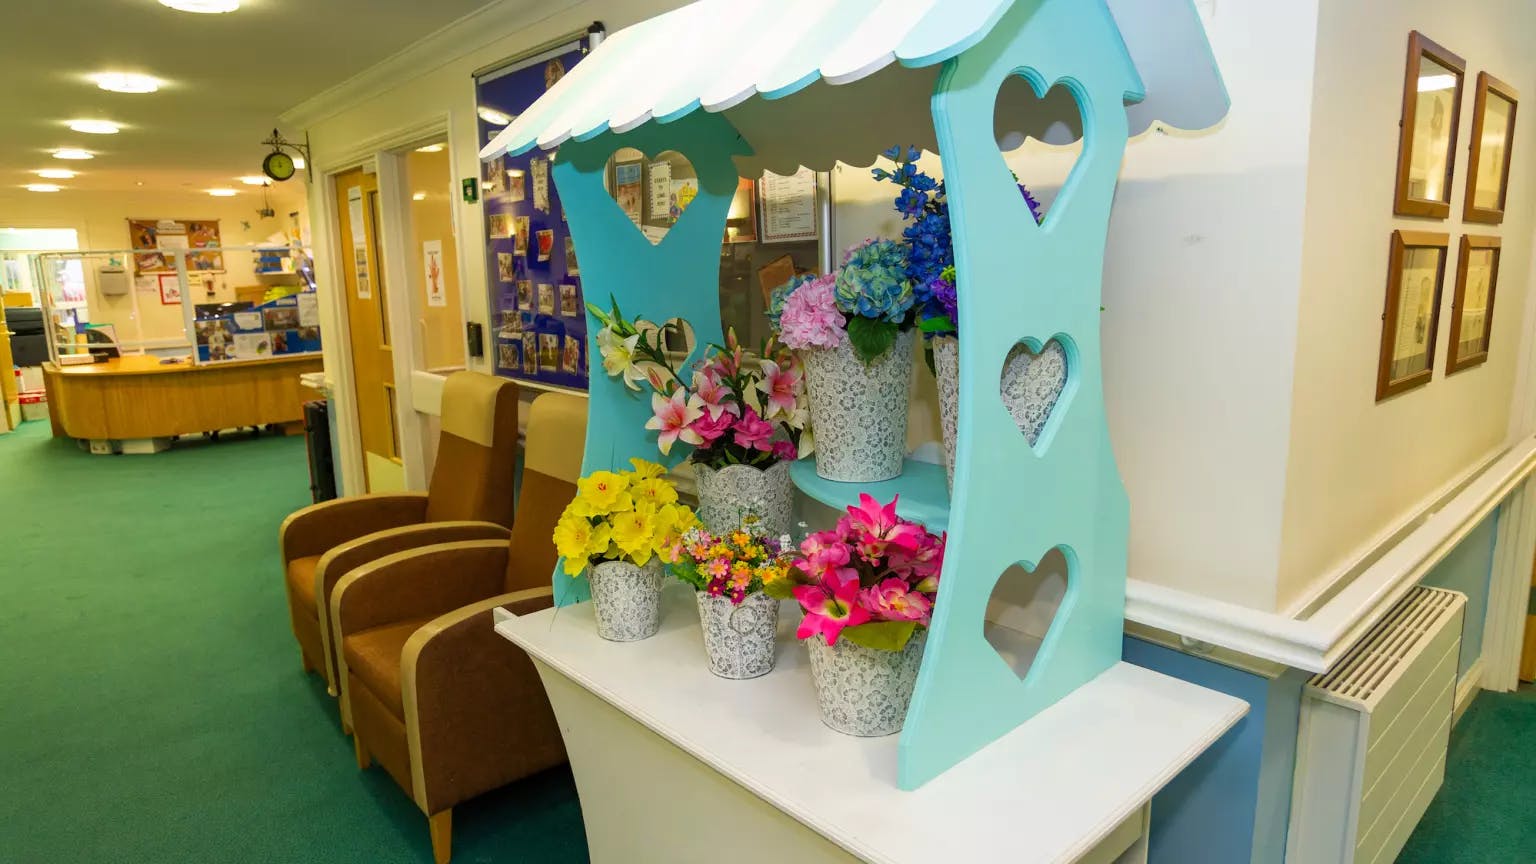 Hallway and reception area of Tye Green Lodge care home in Harlow, Essex